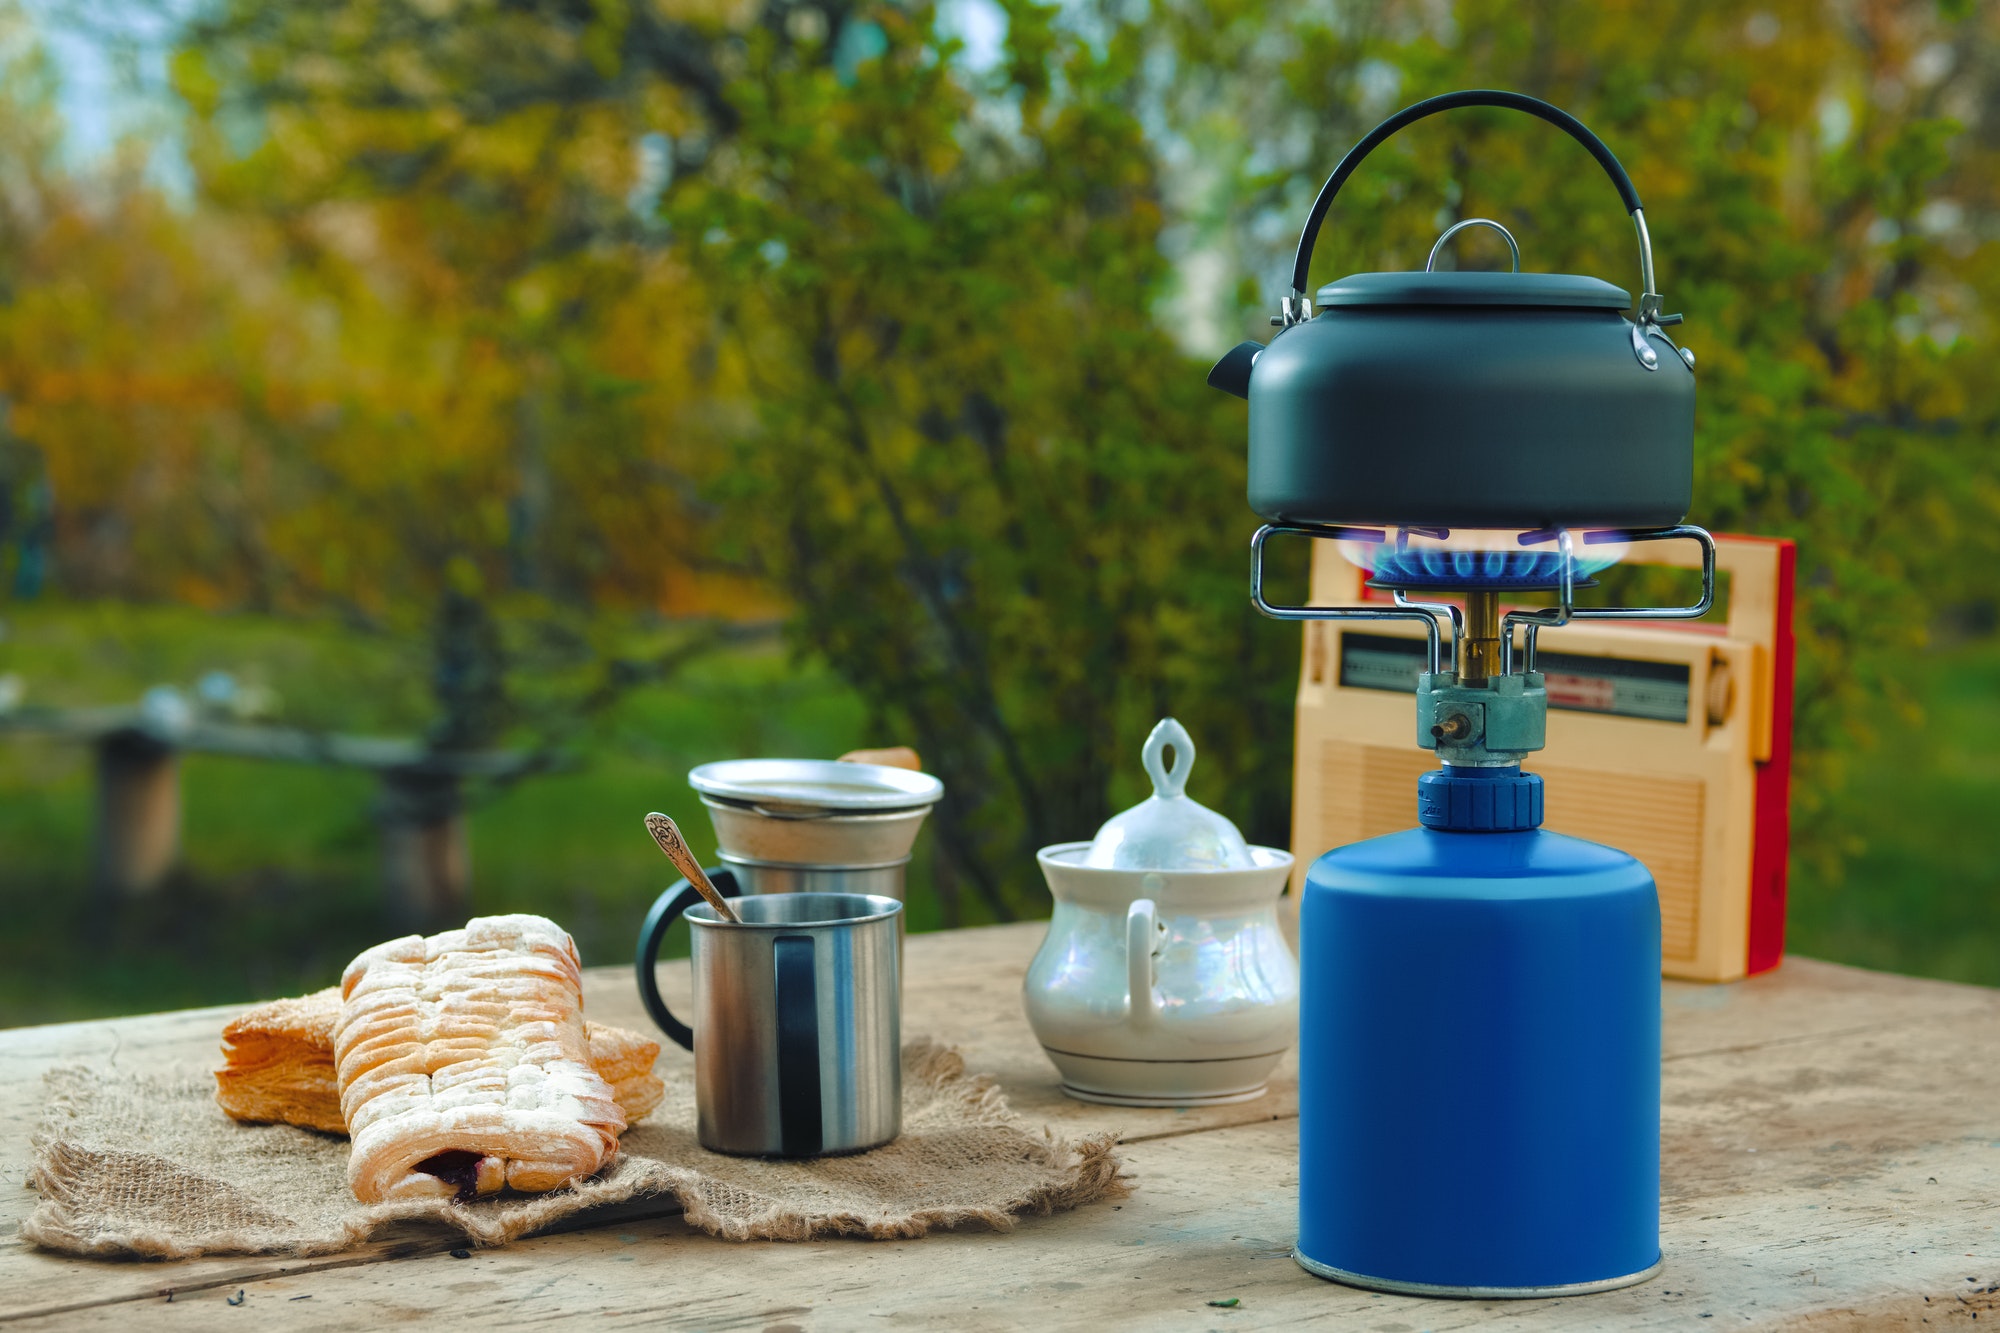 Camping kettle, cups and biscuit on rustic table.